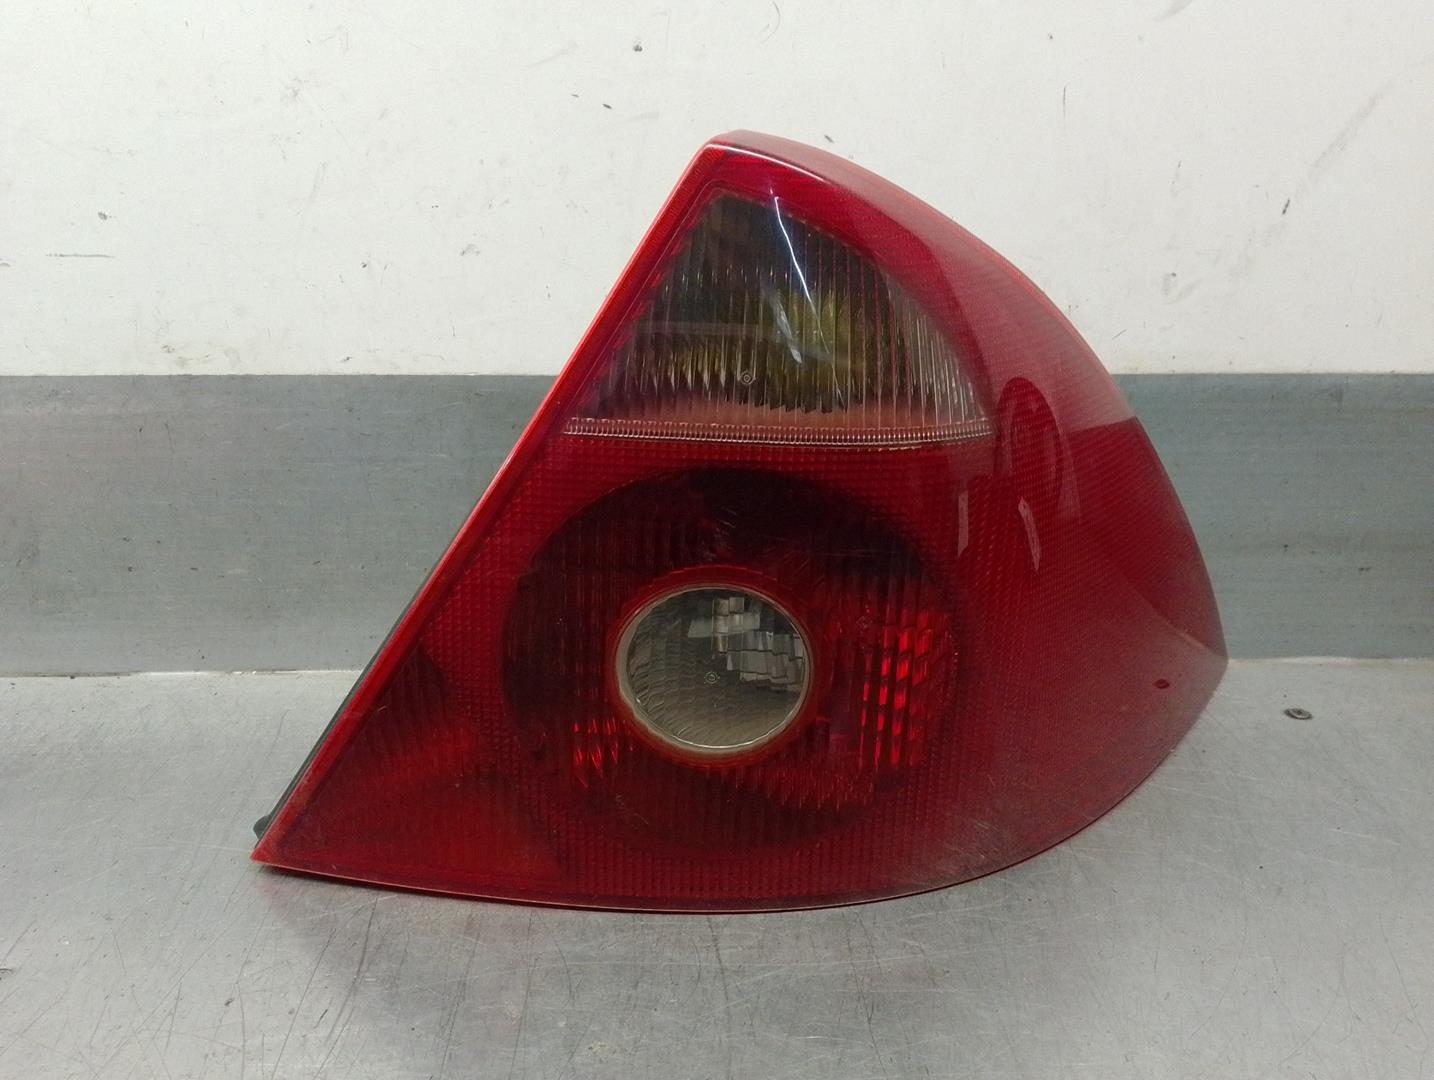 FORD MONDEO III (B5Y) Rear Right Taillight Lamp 1S7113404A, 5PUERTAS 24578402